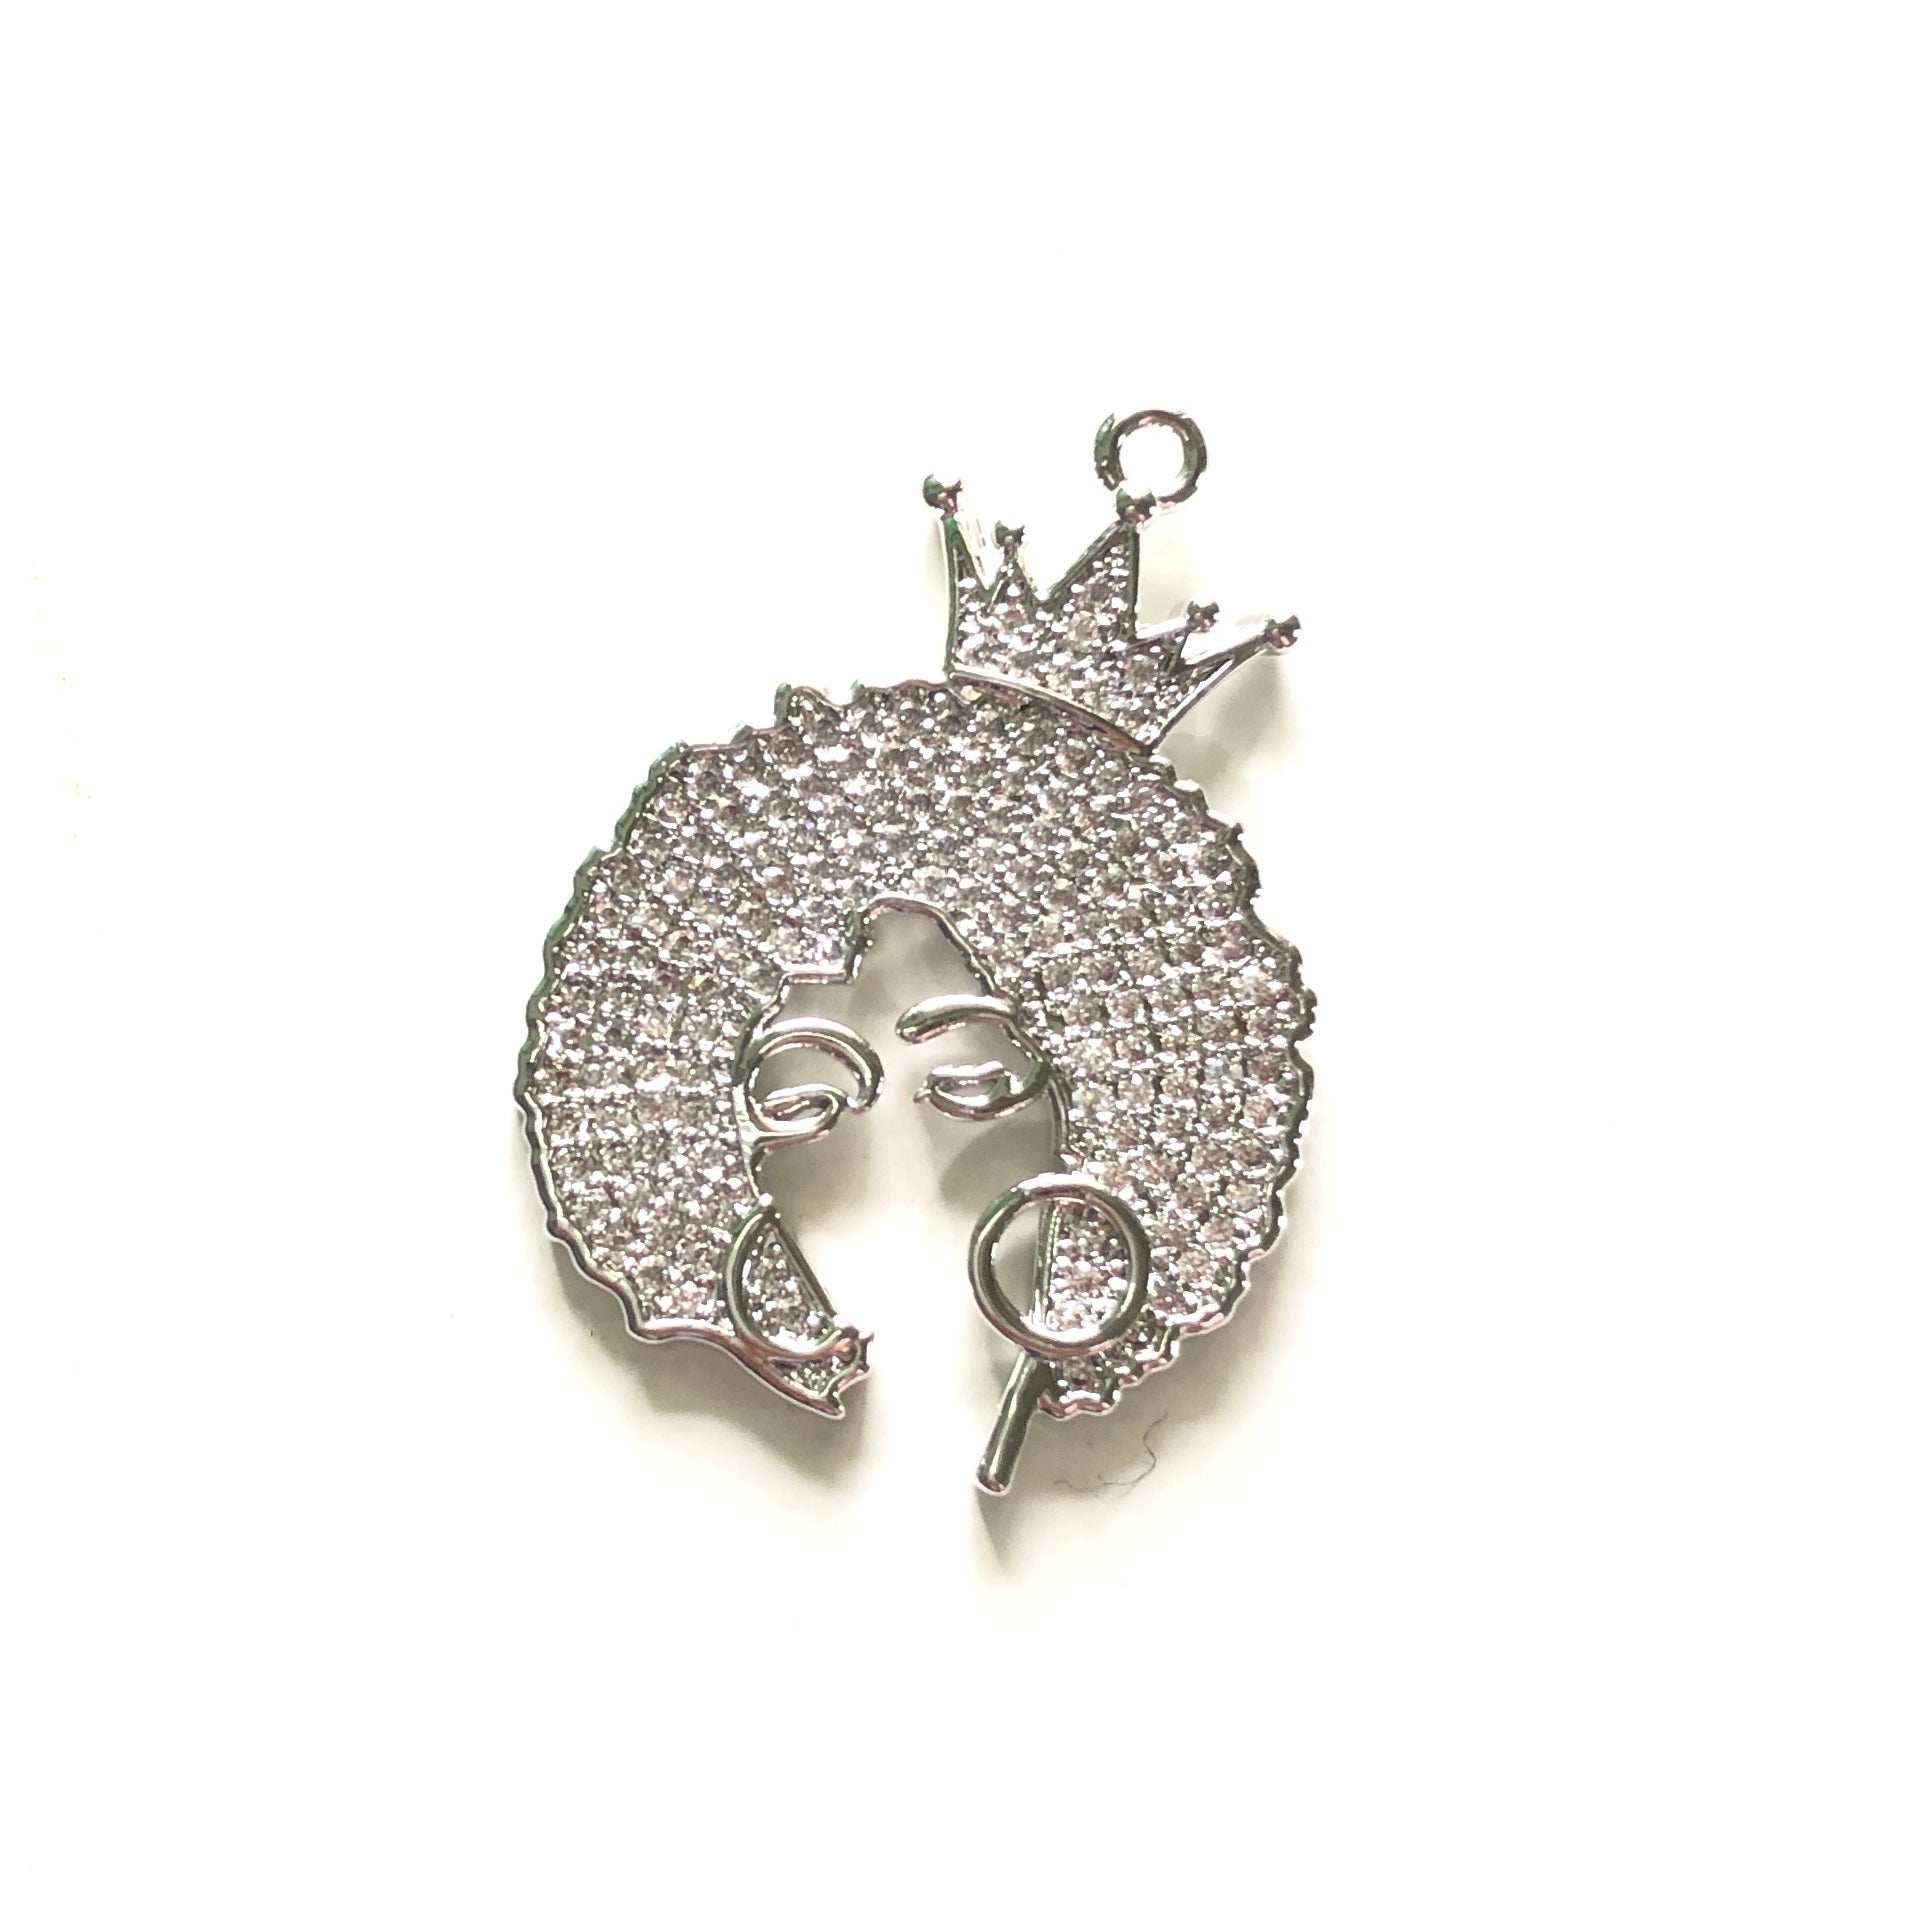 10pcs/lot 34*25mm CZ Afro Girl Black Queen Charms Silver CZ Paved Charms Afro Girl/Queen Charms On Sale Charms Beads Beyond